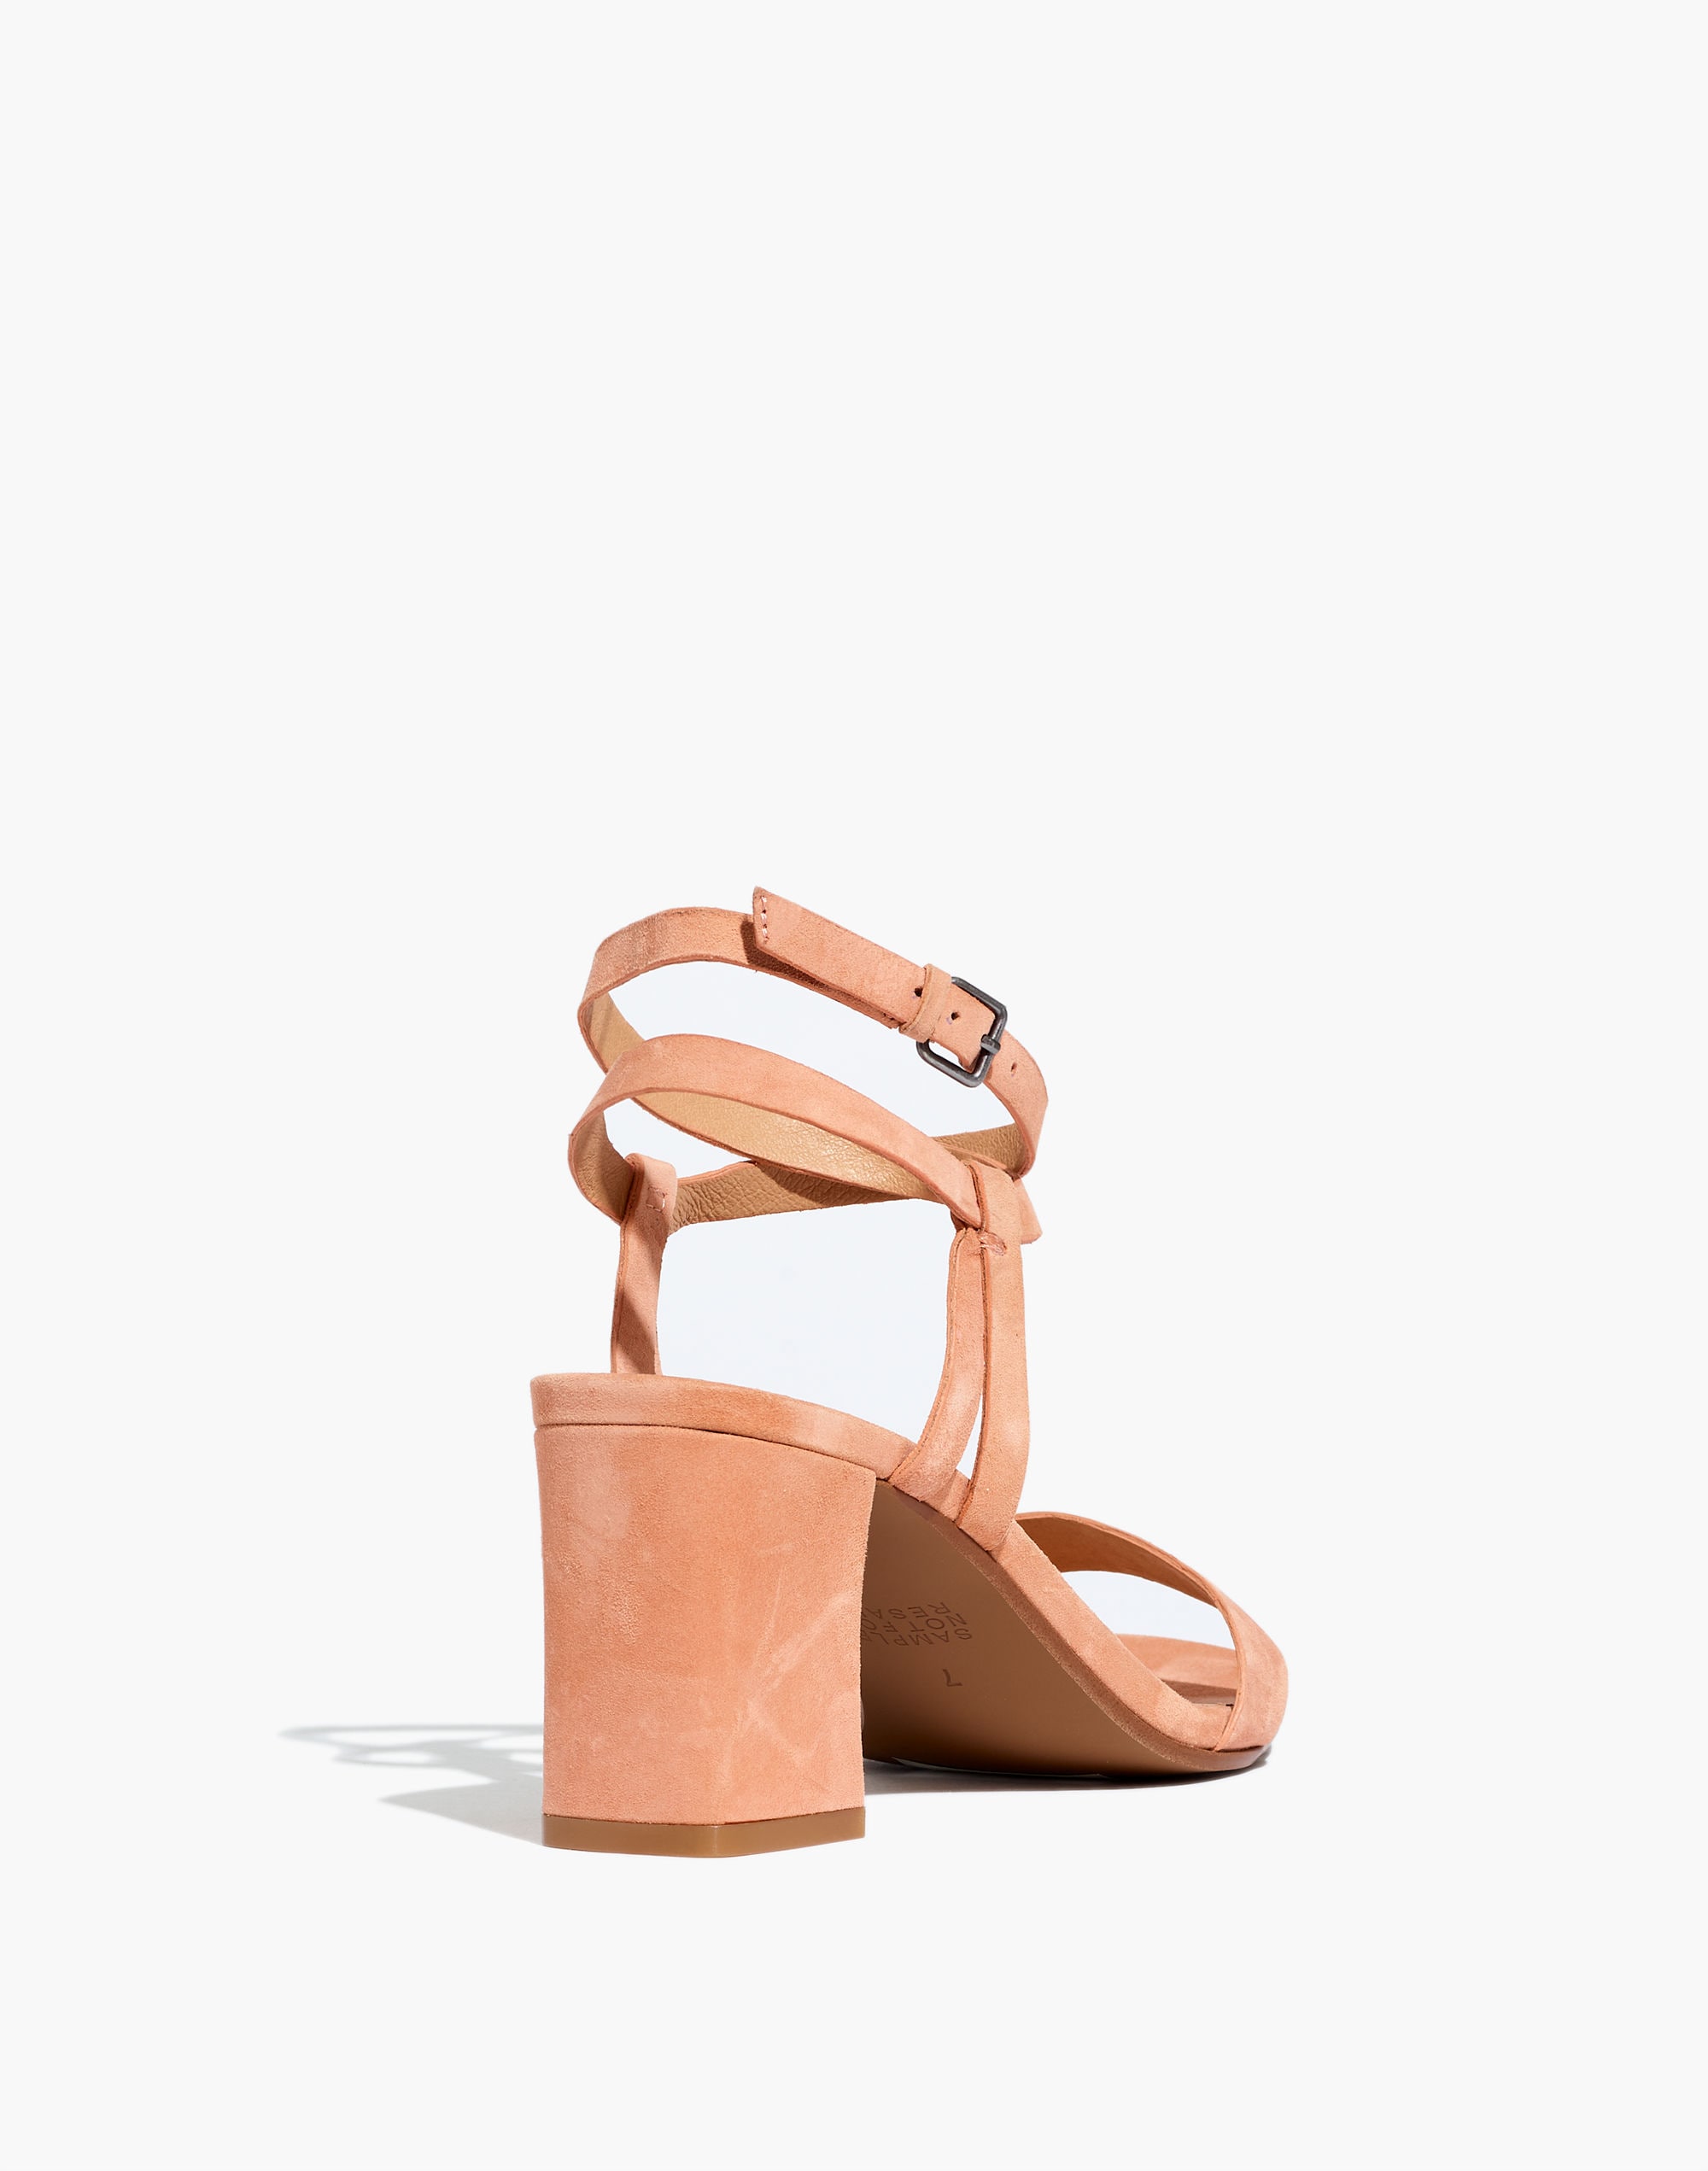 The Loli Ankle-strap Sandal in Suede